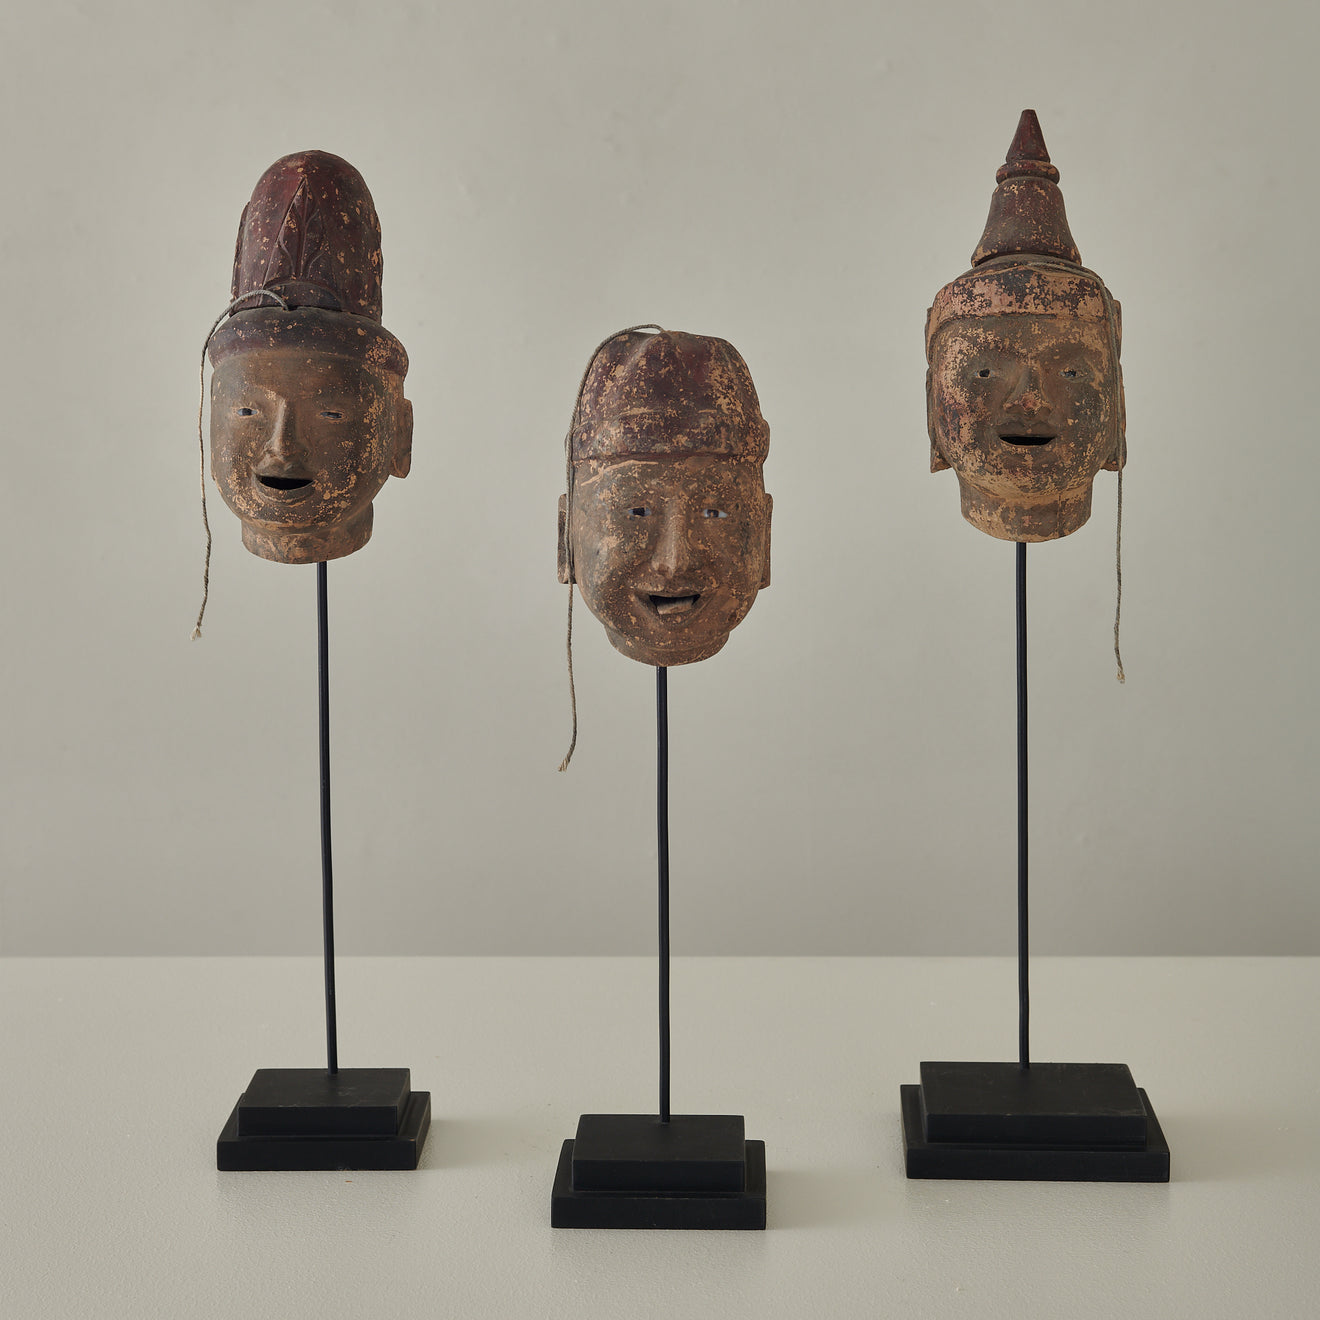 COLLECTION OF 3 ARTICULATED WOOD PUPPET HEADS ON STANDS